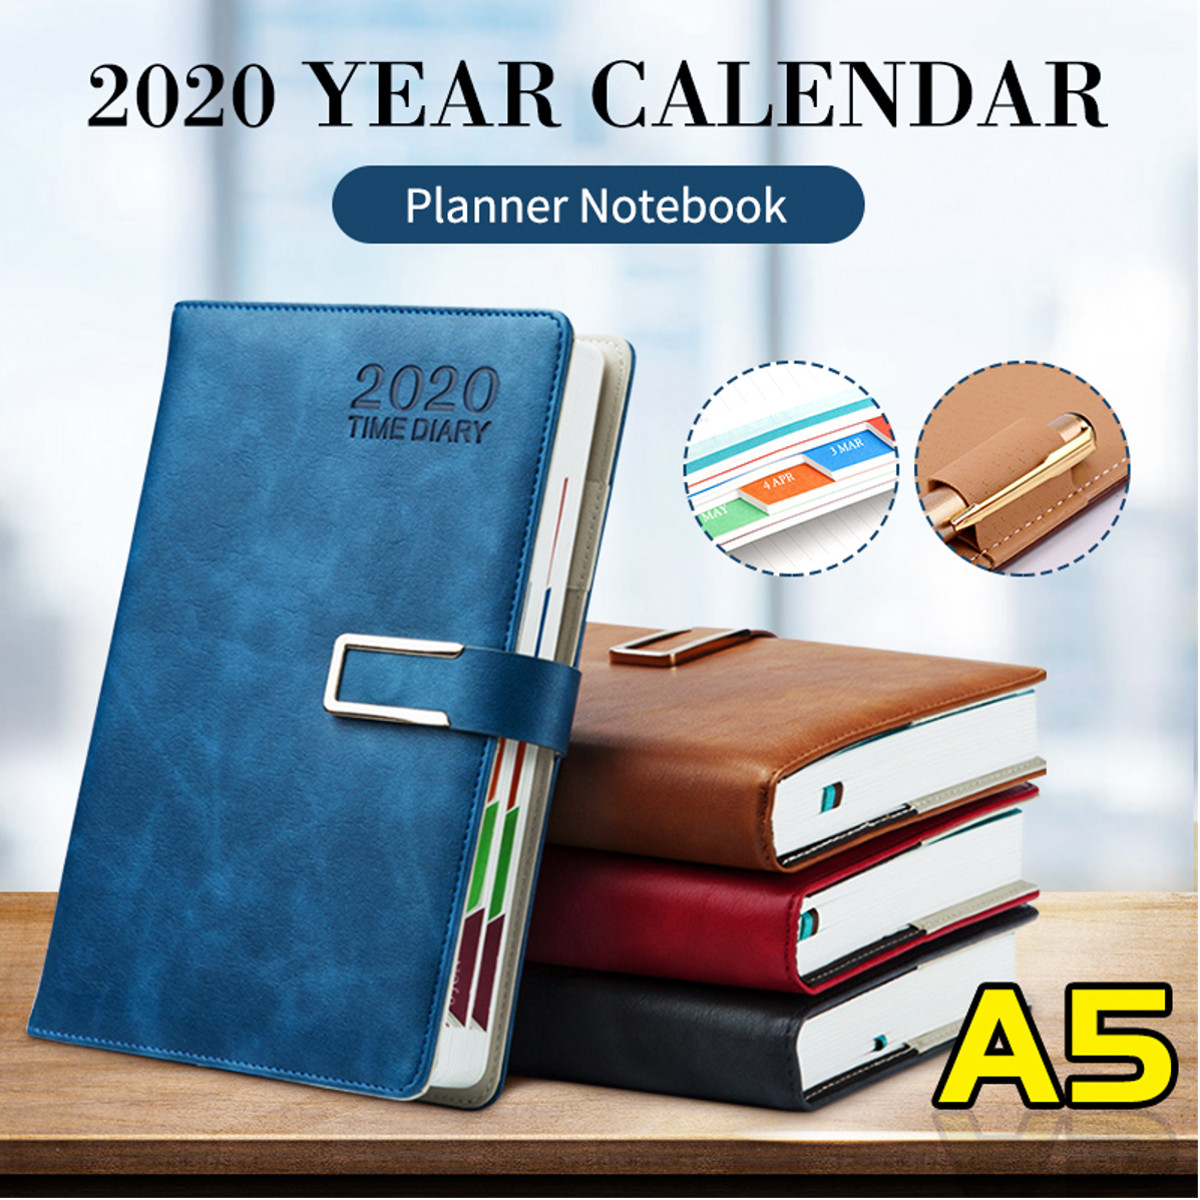 A5-Size-2020-Planner-Agenda-Annual-Calendar-Notebook-Portable-Weekly-Notes-Manual-DIY-Diary-Monthly--1621745-1